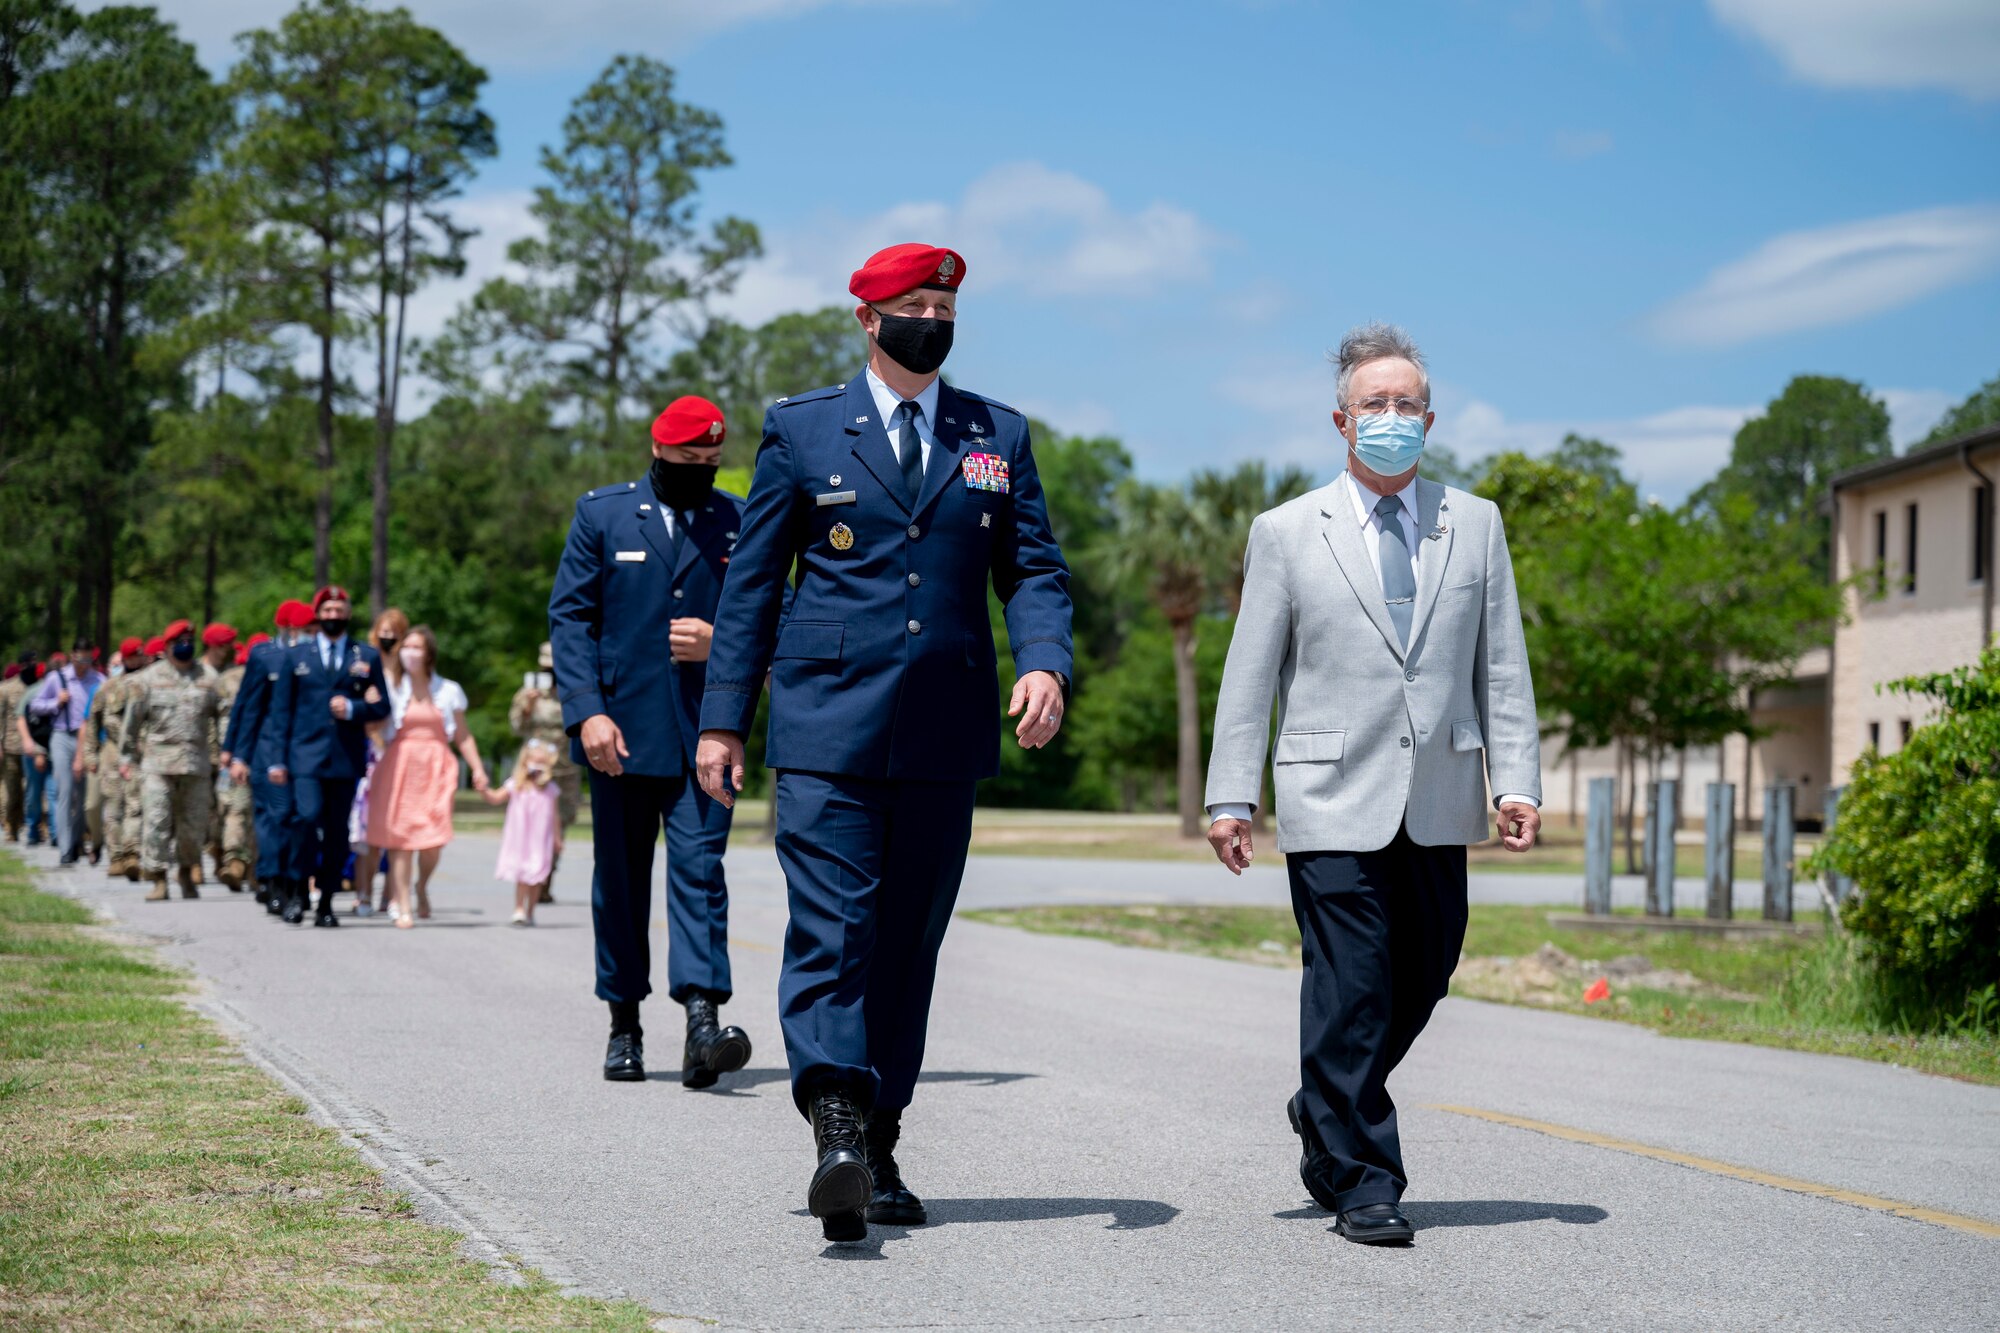 U.S. Air Force Col. Matthew Allen, the commander of the 24th Special Operations Wing, and U.S. Air Force, retired, Col. Mark Roland, father of U.S. Air Force Capt. Matthew Roland, walk to unveil a sign during a building dedication ceremony at Hurlburt Field, Florida, May 6, 2021.